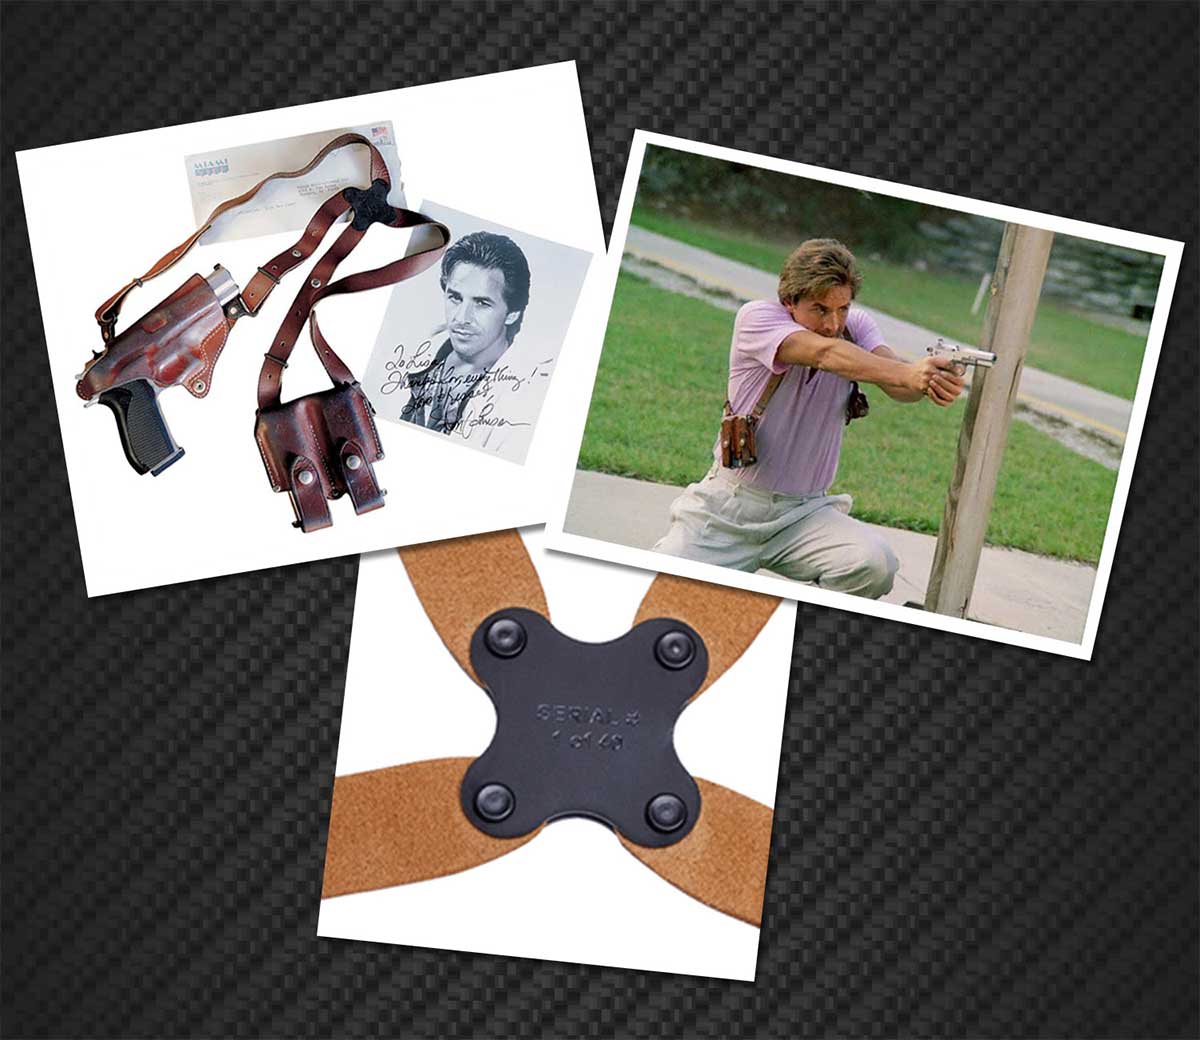 Galco’s Miami Classic 40th Anniversary Limited-Ed Shoulder Holster